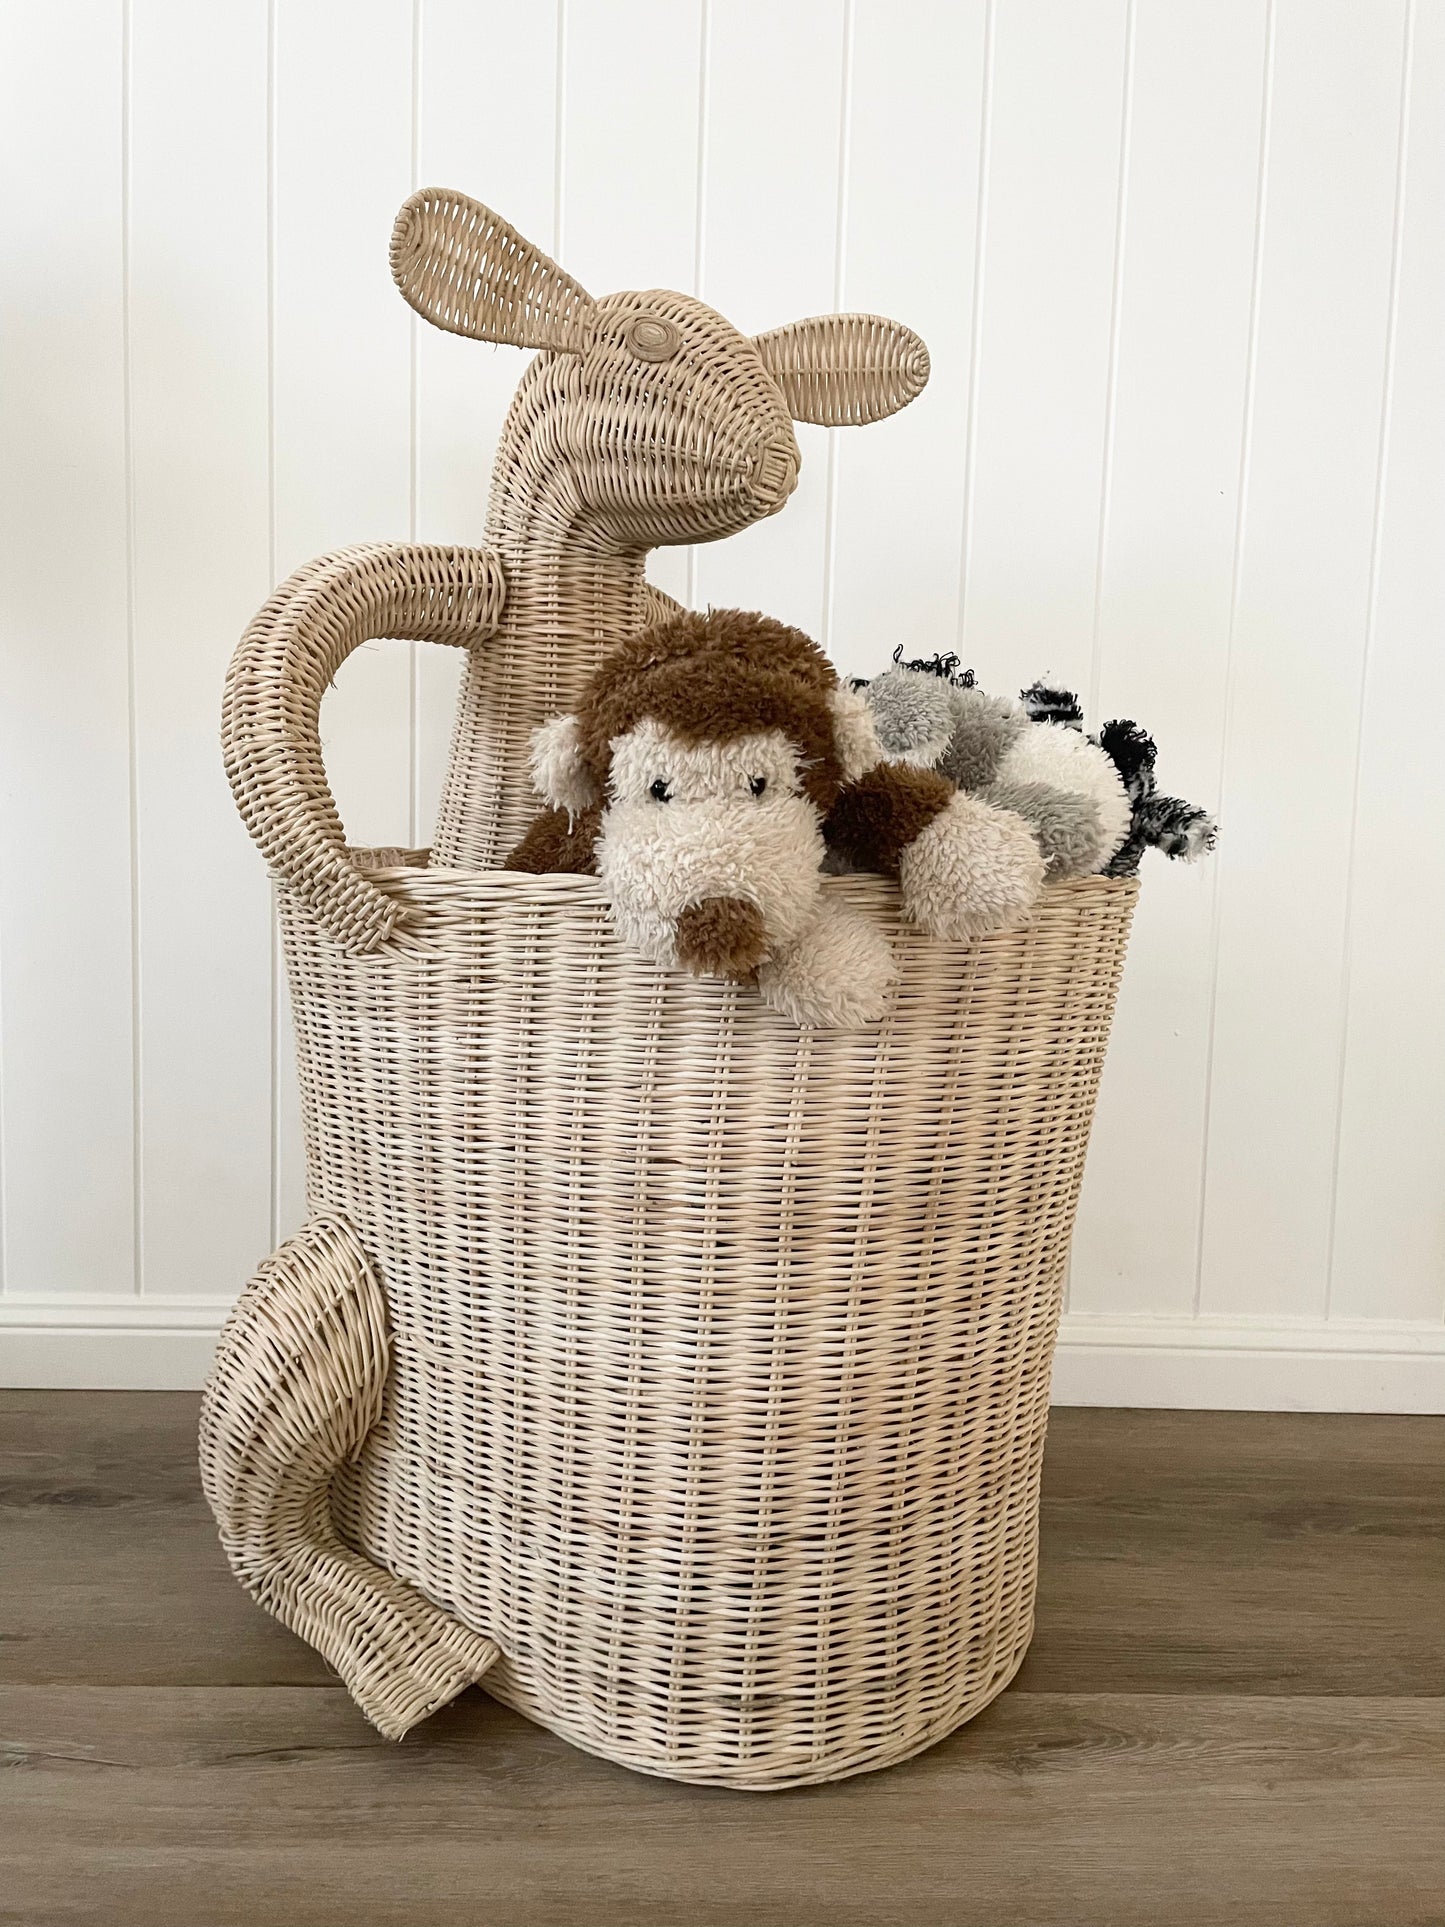 Roo Toy Basket